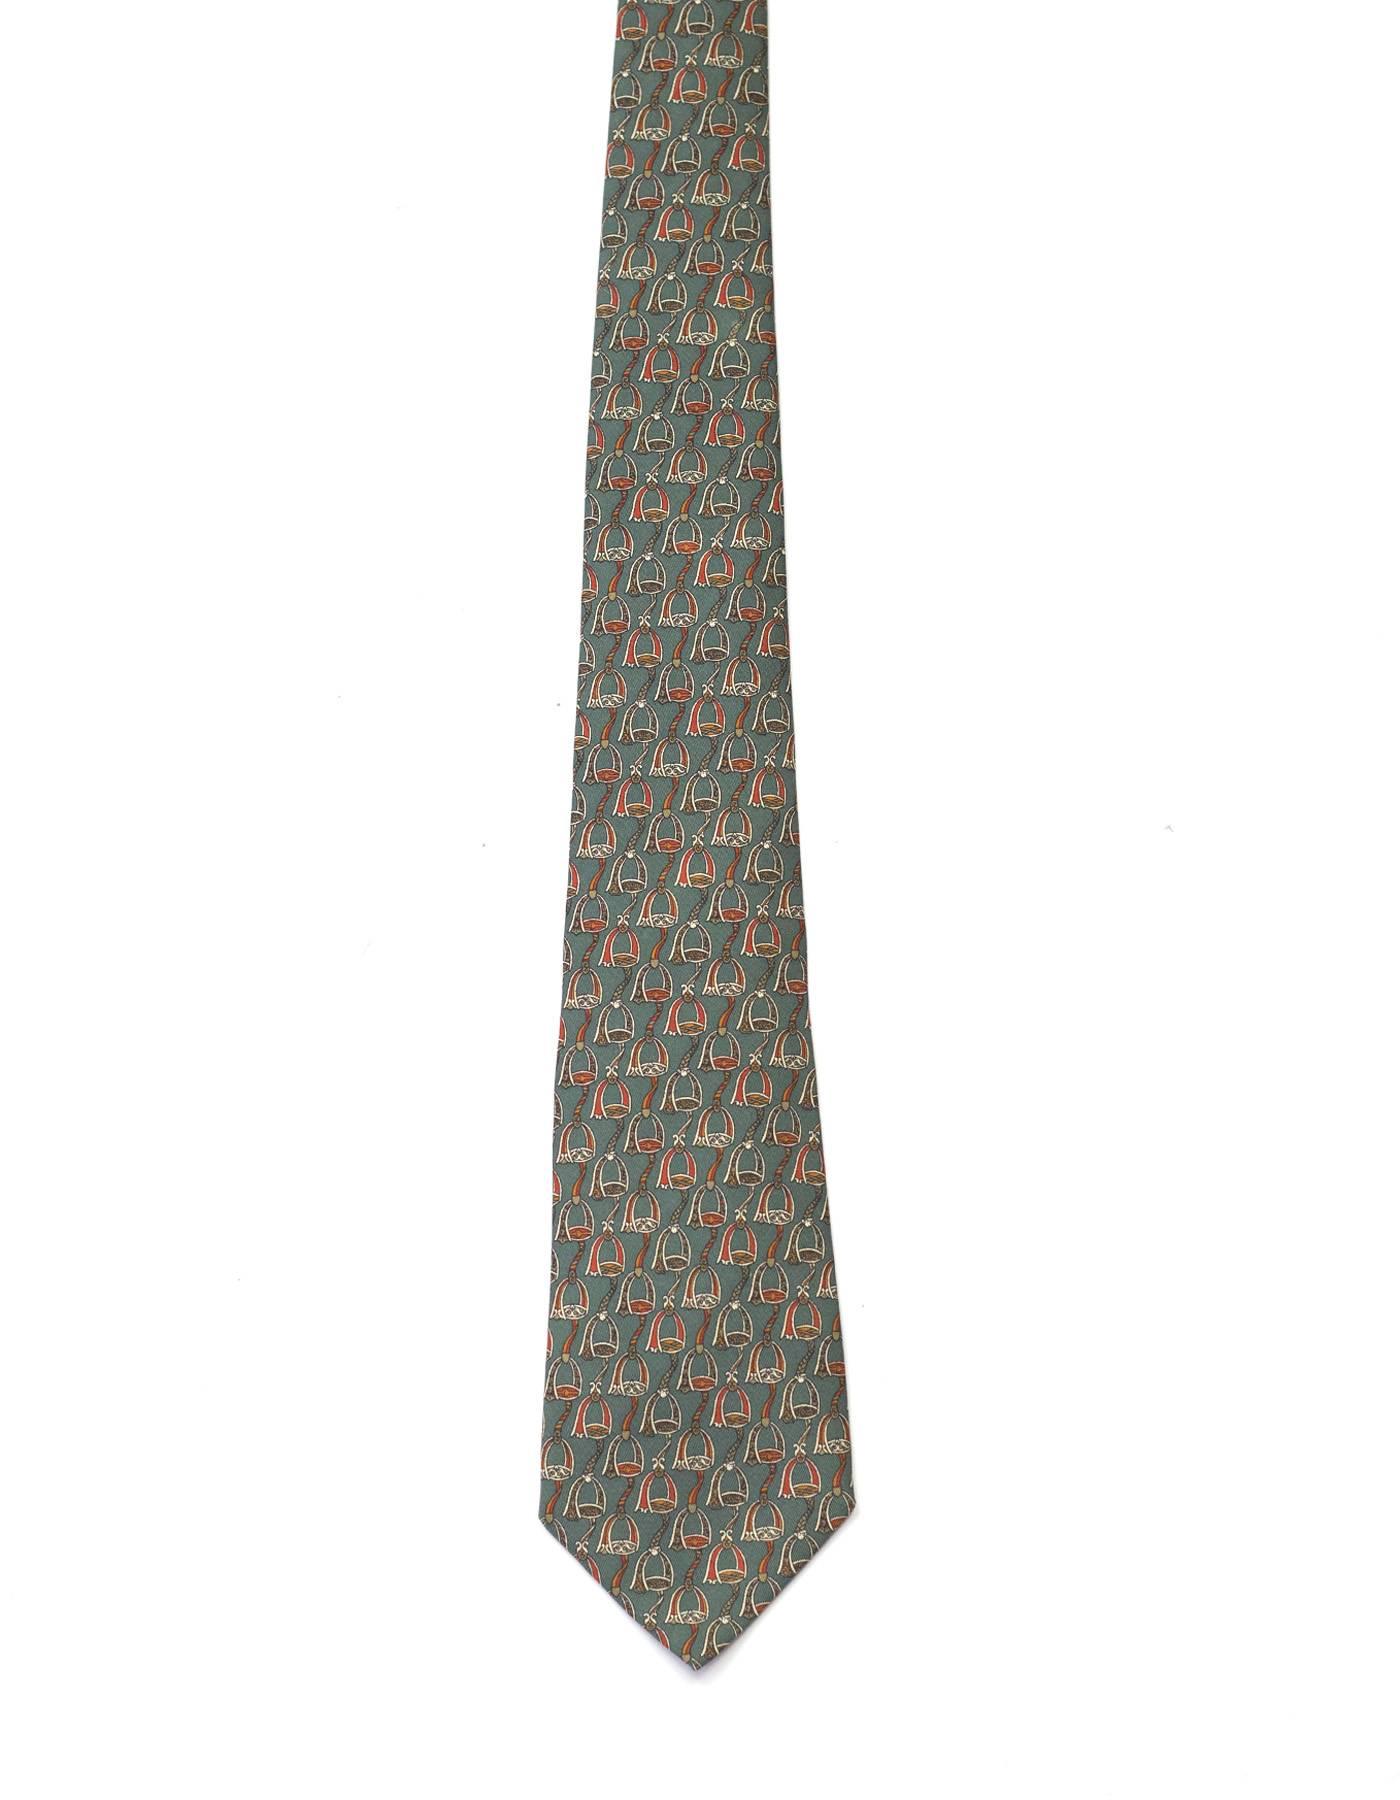 Salvatore Ferragamo Green Stirrup Print Silk Tie 
Features beige ribbon printed toward bottom of tie with logo printed on top

Made In: Italy
Color: Olive green, grey and burgundy
Composition: 100% silk
Overall Condition: Excellent pre-owned